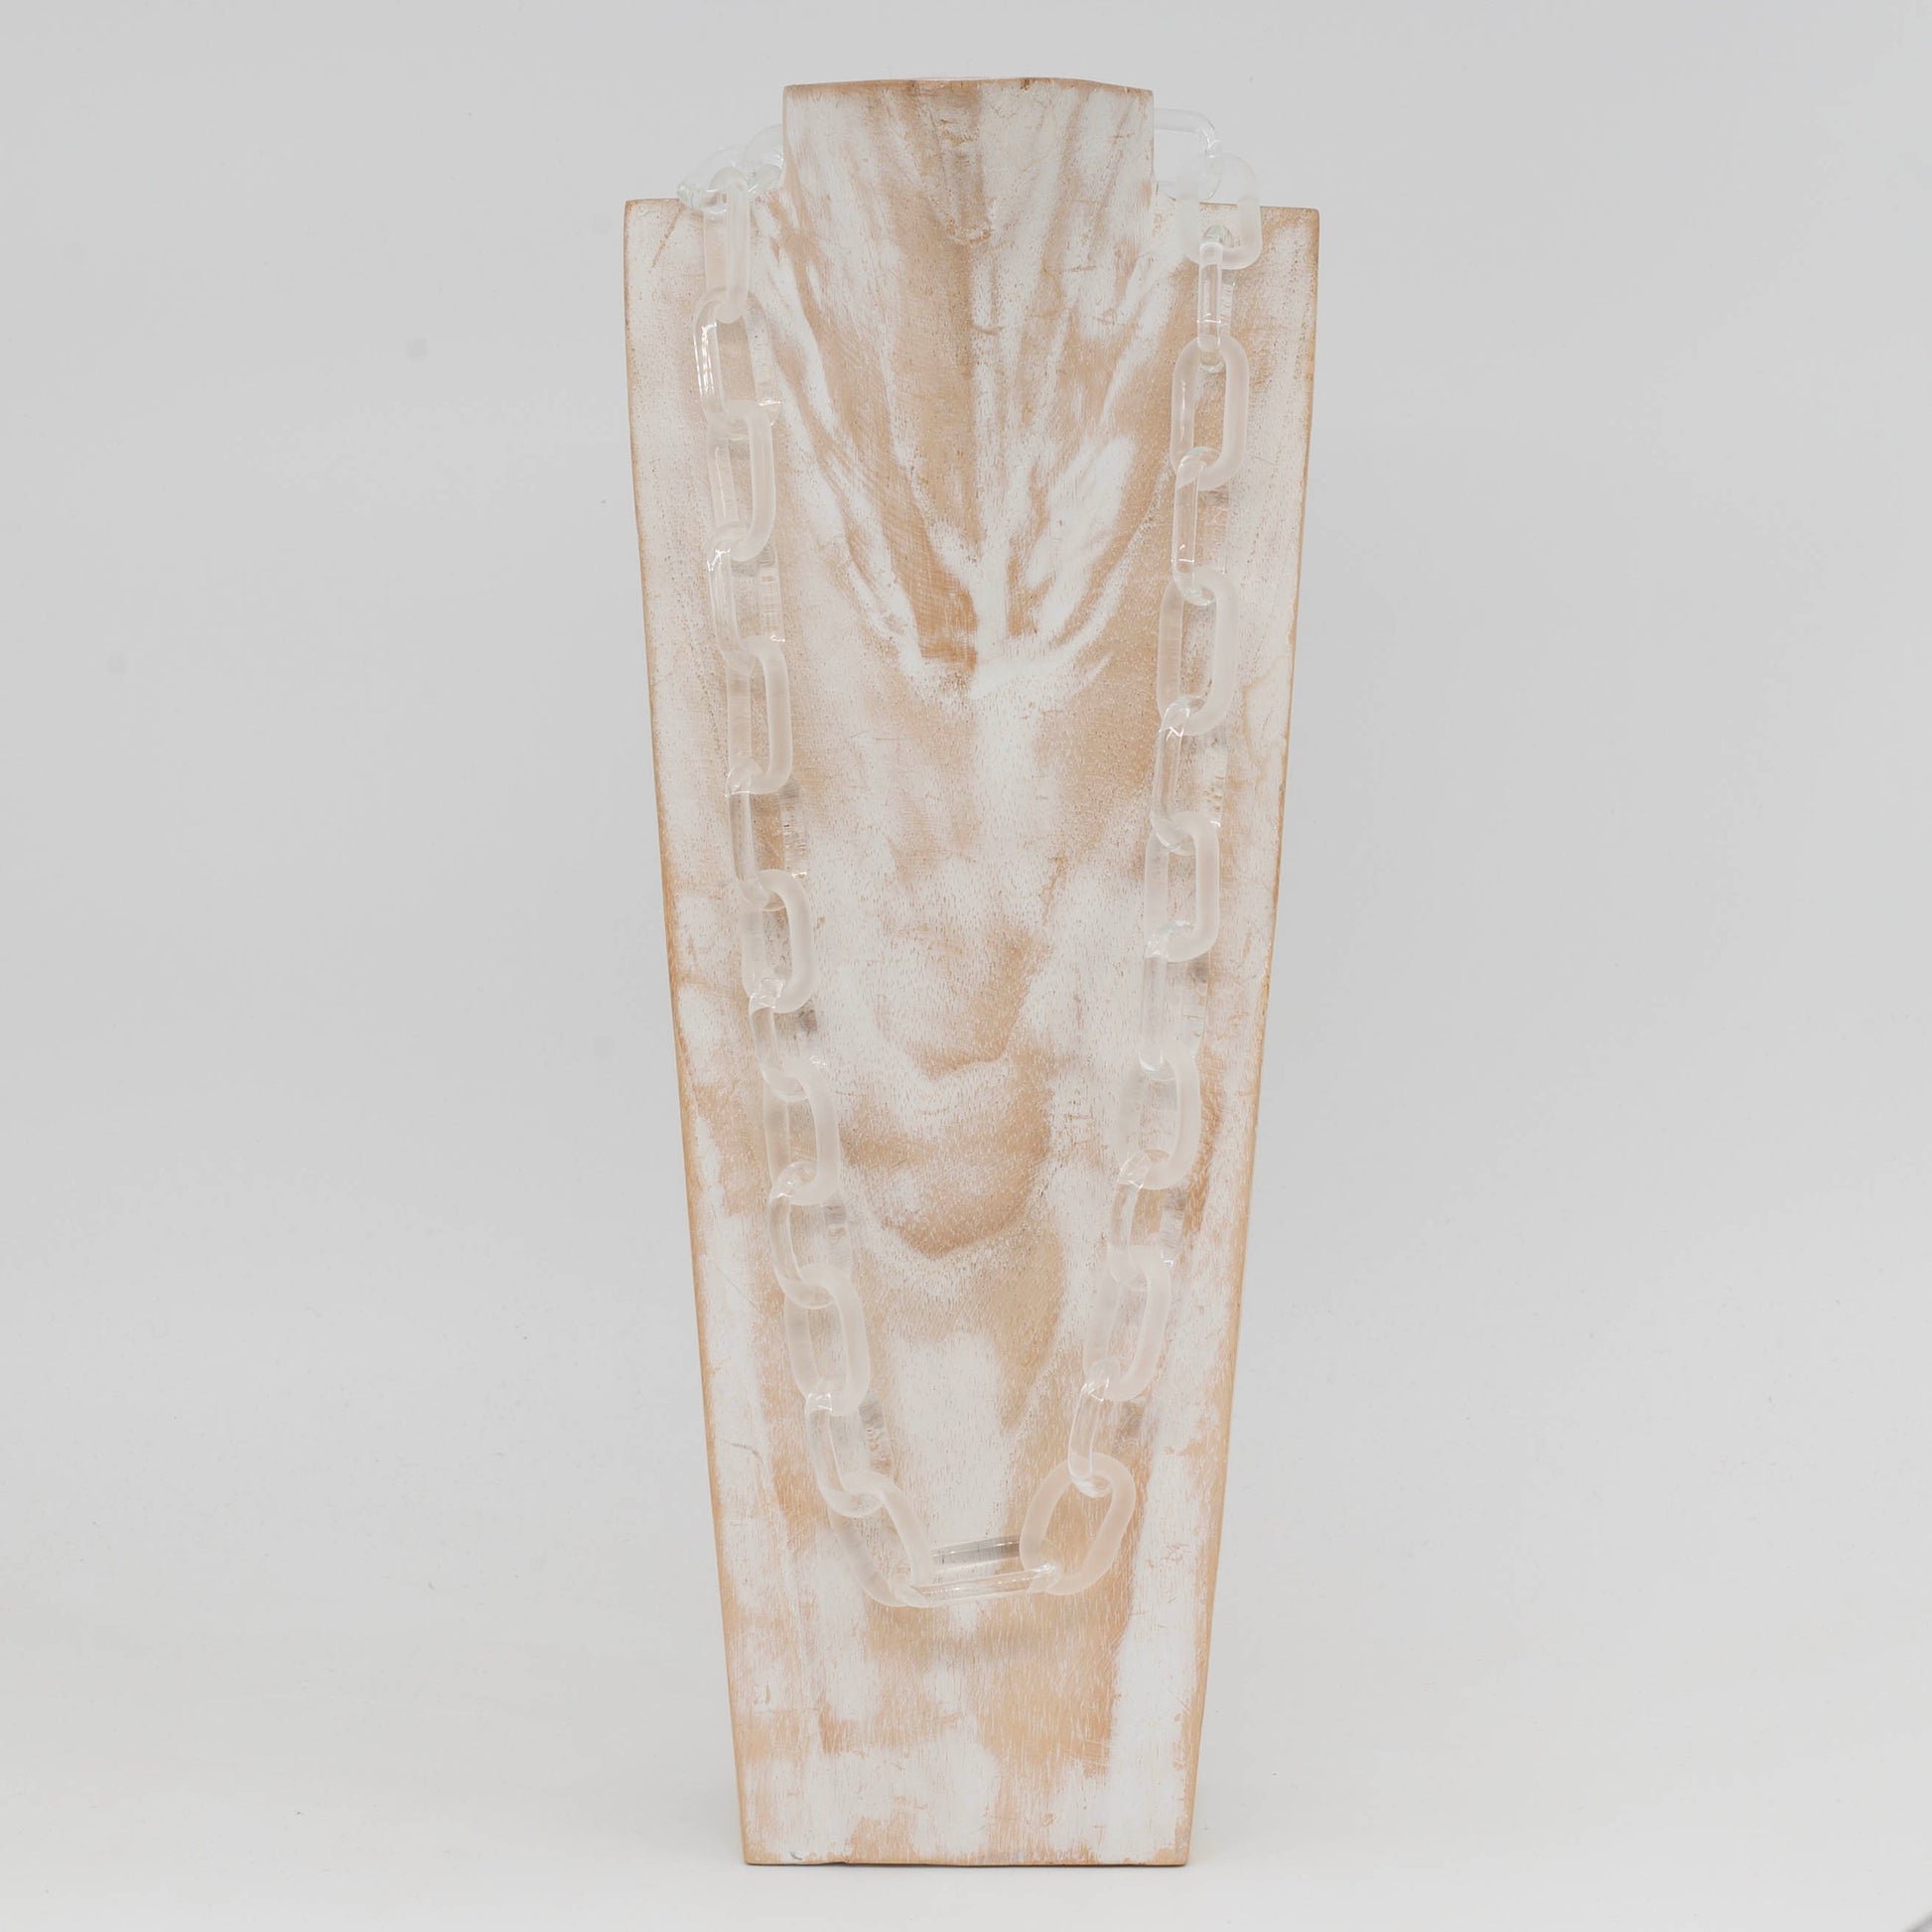 Whitewashed wood torso displaying a glass necklace made with bold links of alternating clear and frosted glass